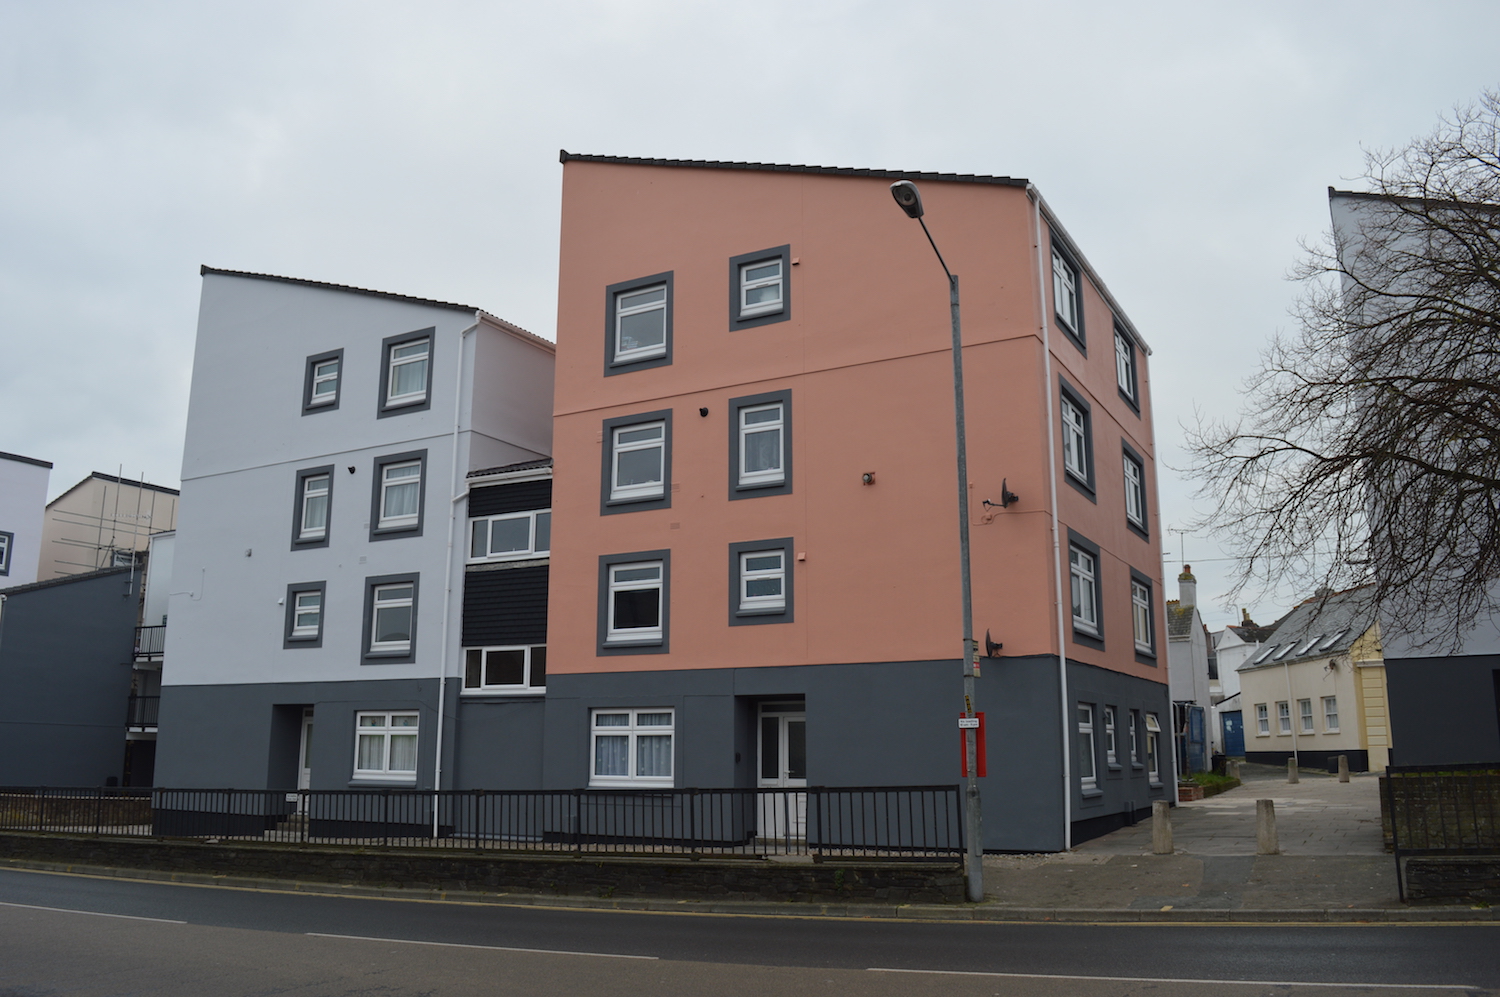 CLC teams up with Dulux to bring new colour to Cornish flats